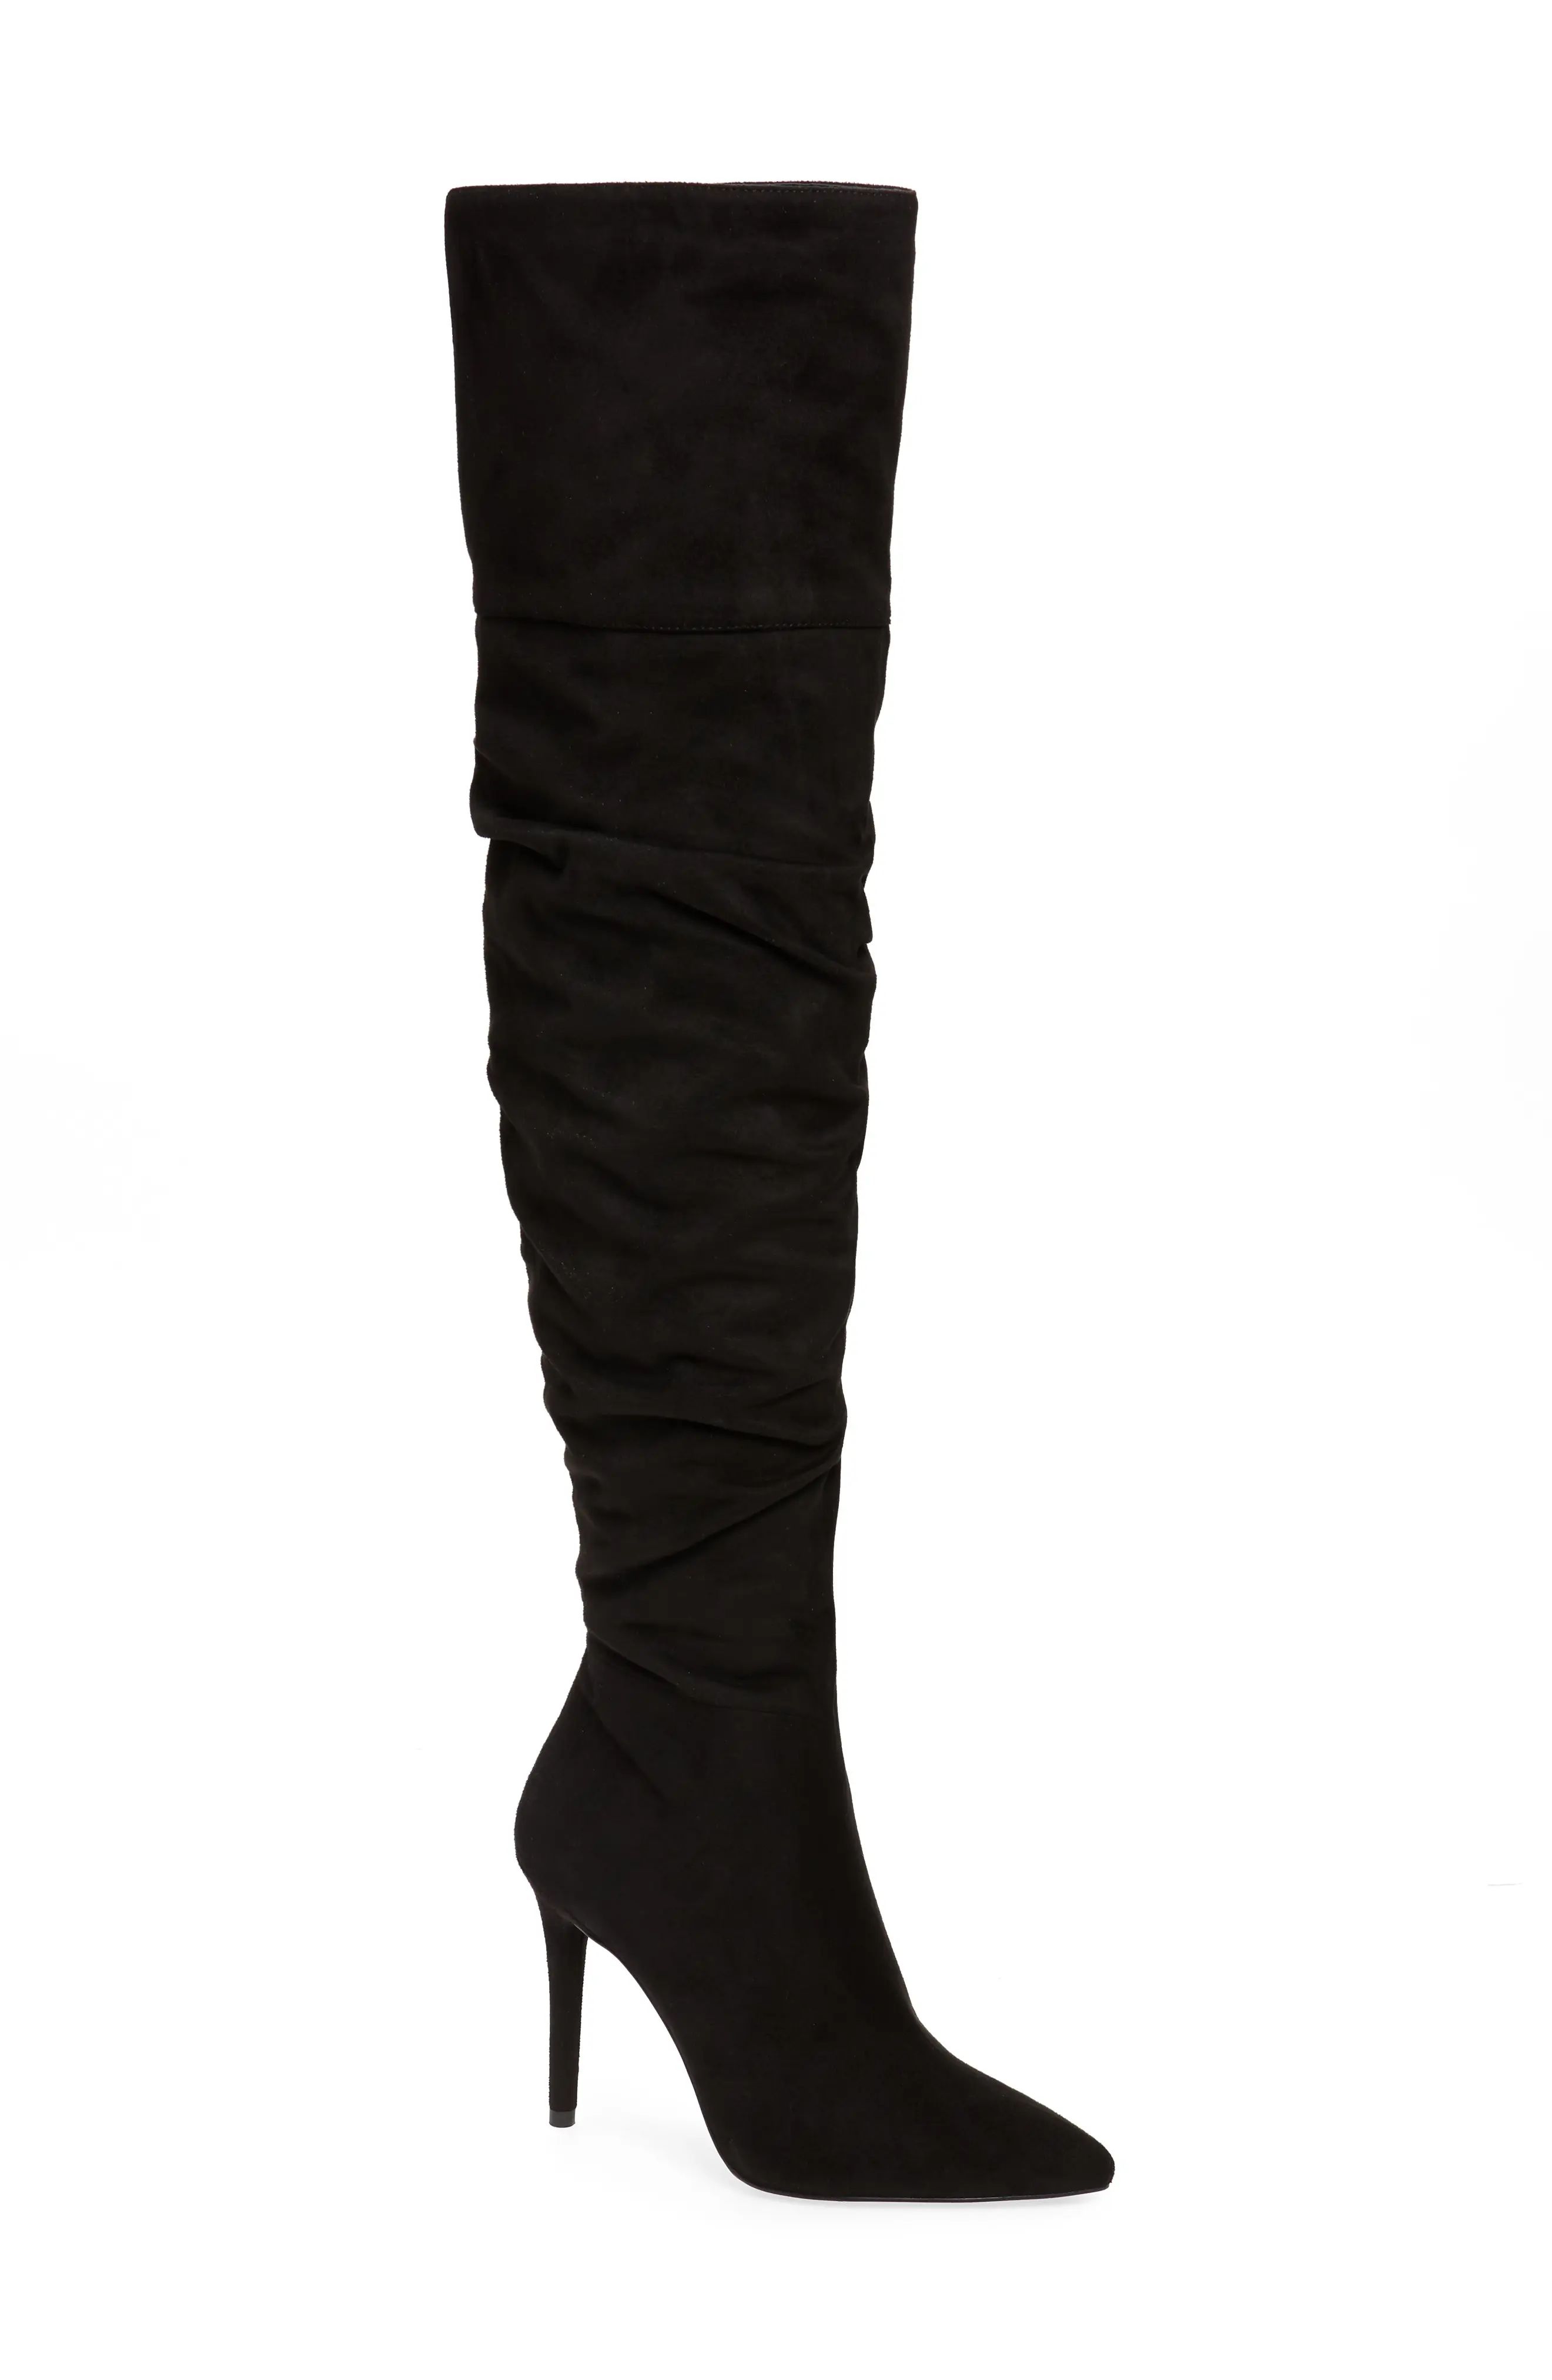 Women's Jessica Simpson Lyrelle Pointy Toe Slouchy Knee High Boot, Size 9 M - Black | Nordstrom